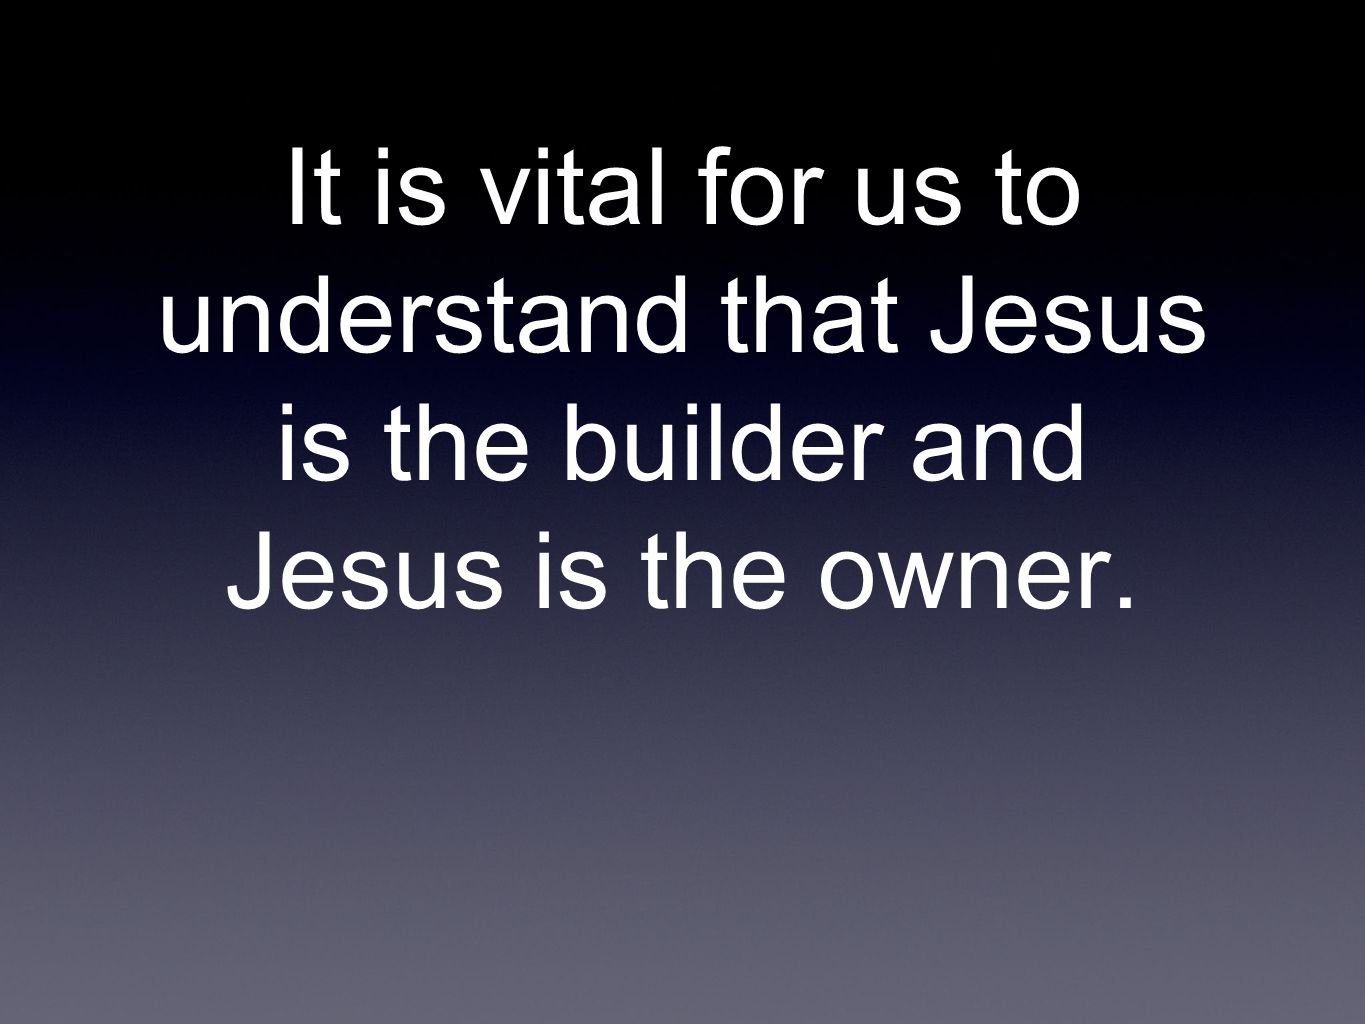 It is vital for us to understand that Jesus is the builder and Jesus is the owner.